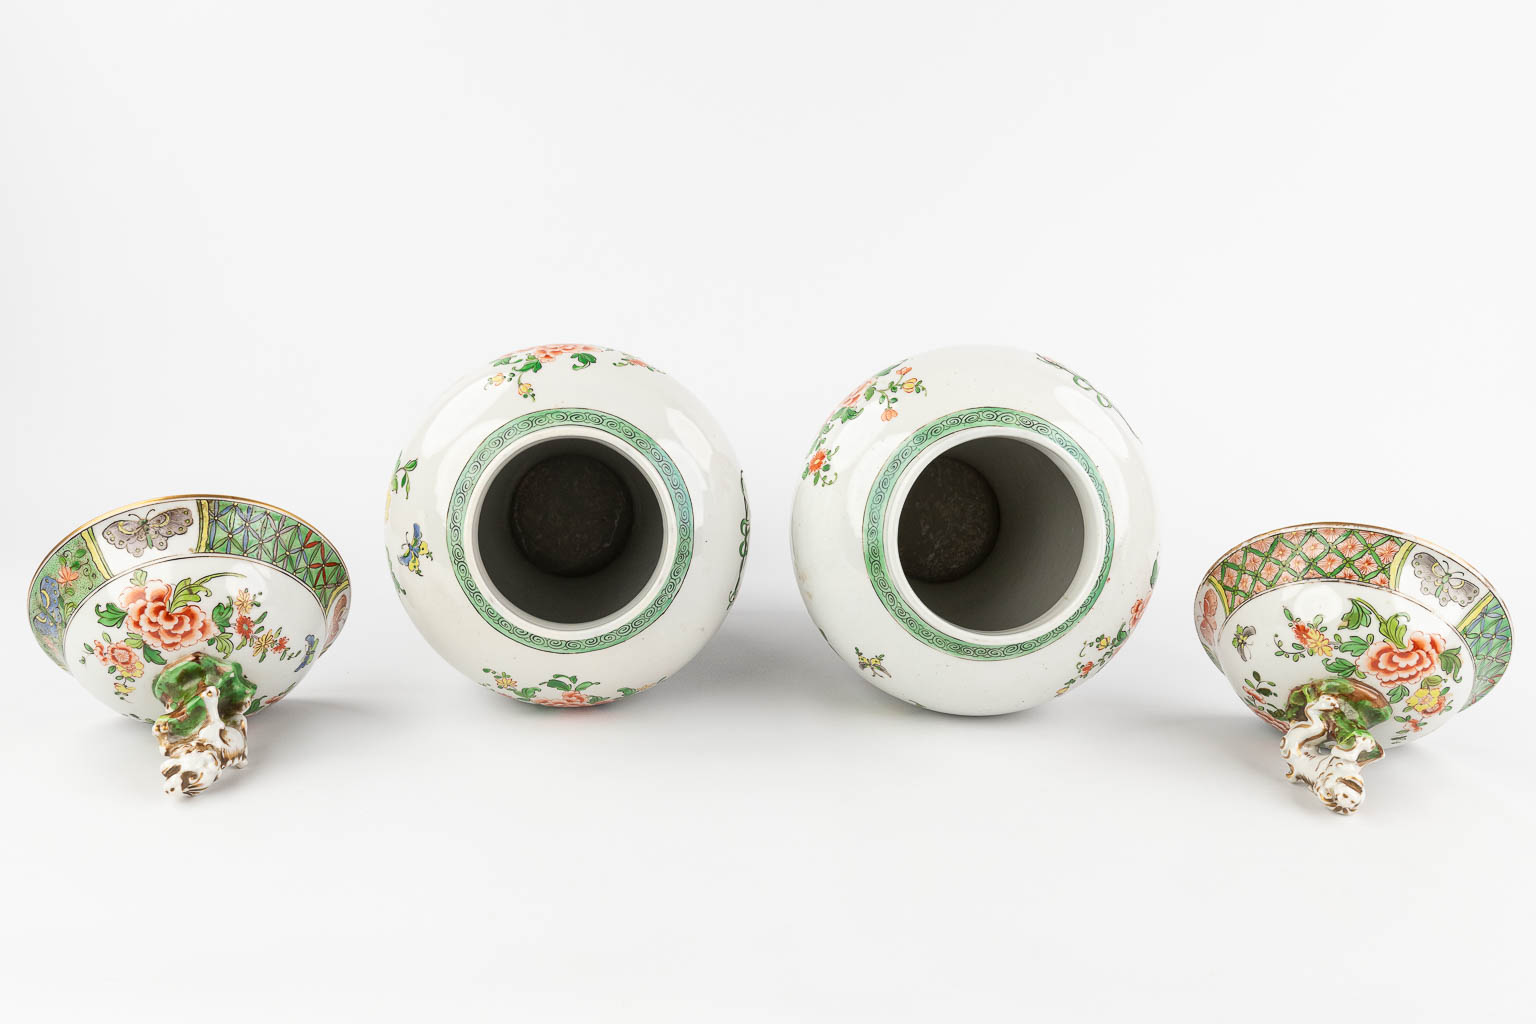 Pair of Chinese-style vases, porcelain with hand-painted flower decor. Probably Samson, France. (H: 41 x D: 19 cm)